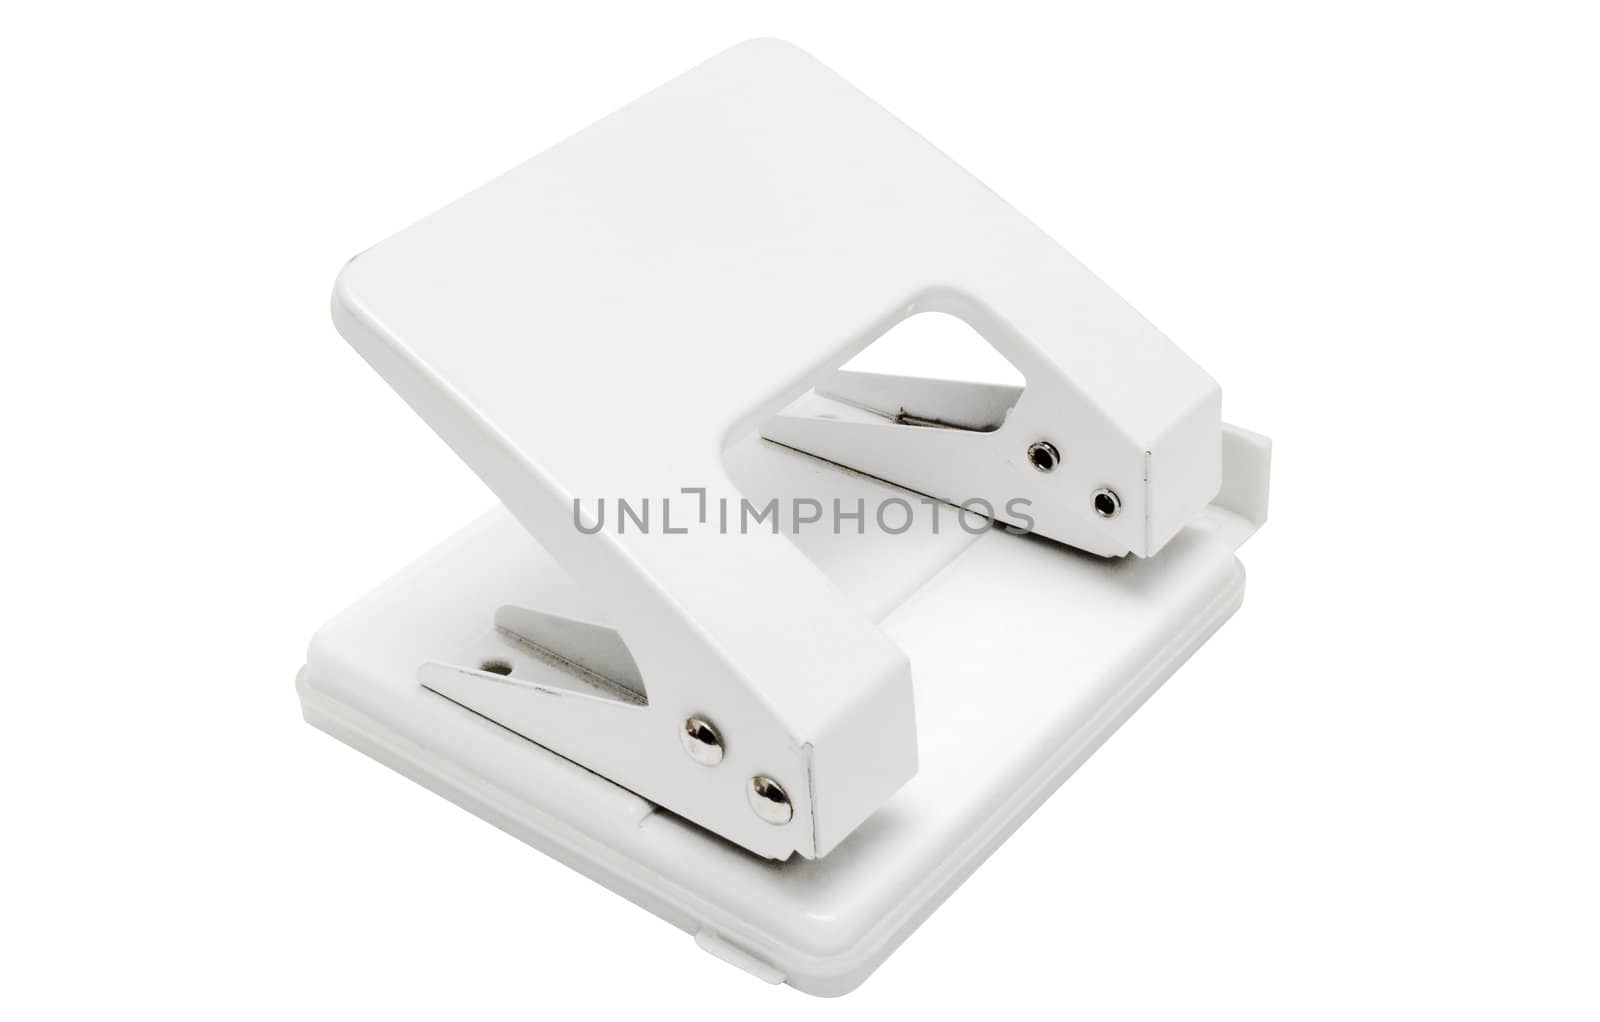 Hole puncher isolated on a white background. File contains clipping path.